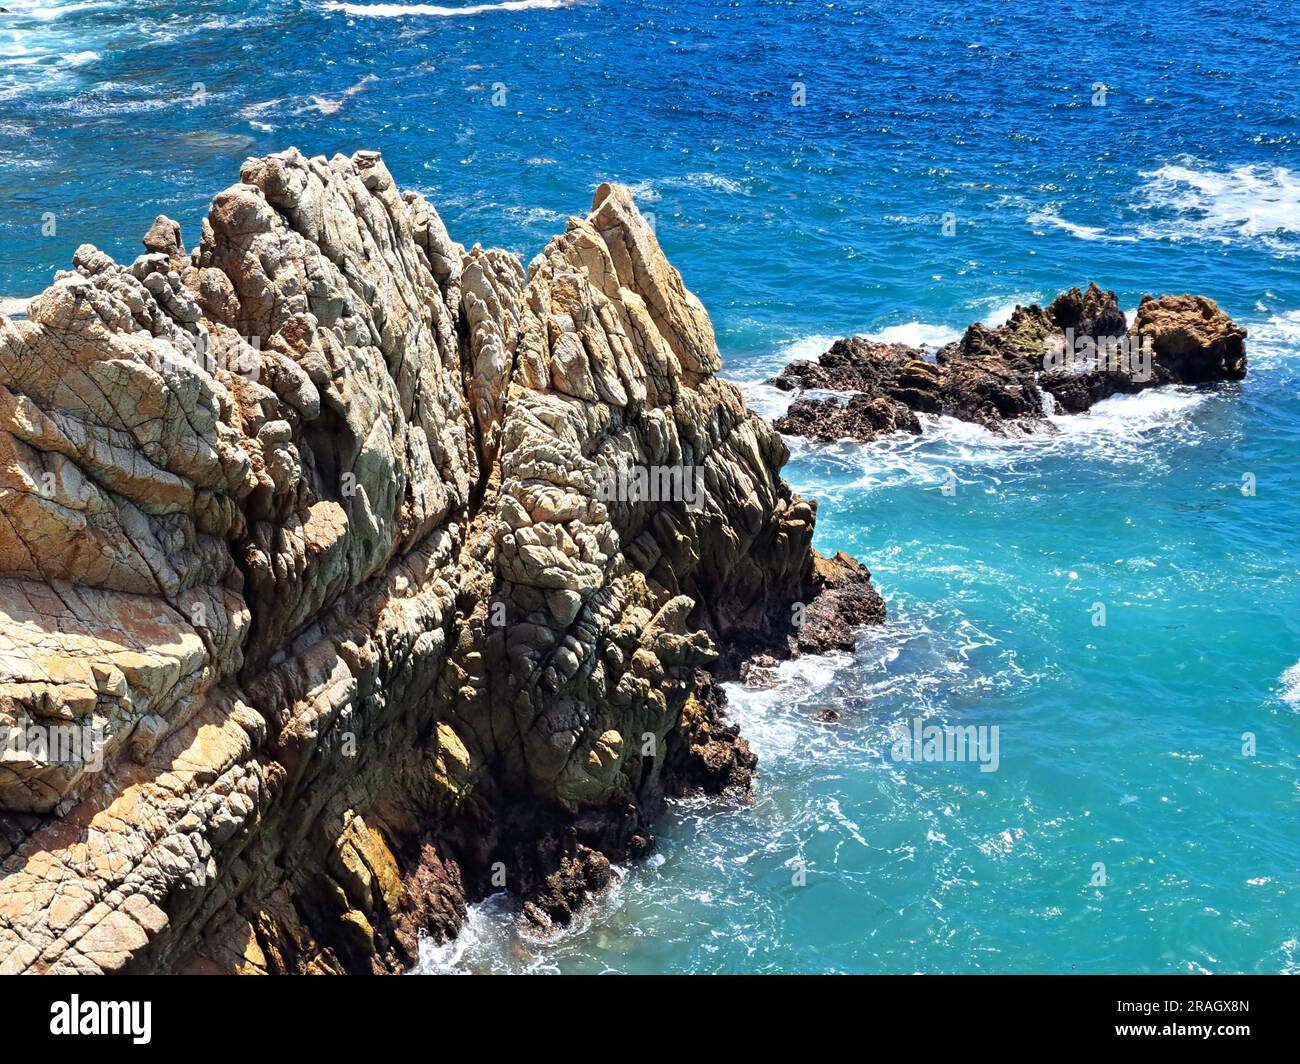 La Quebrada is a cliff with a channel in the port of Acapulco, Guerrero, Mexico where the famous diving is done by young people who climb it Stock Photo